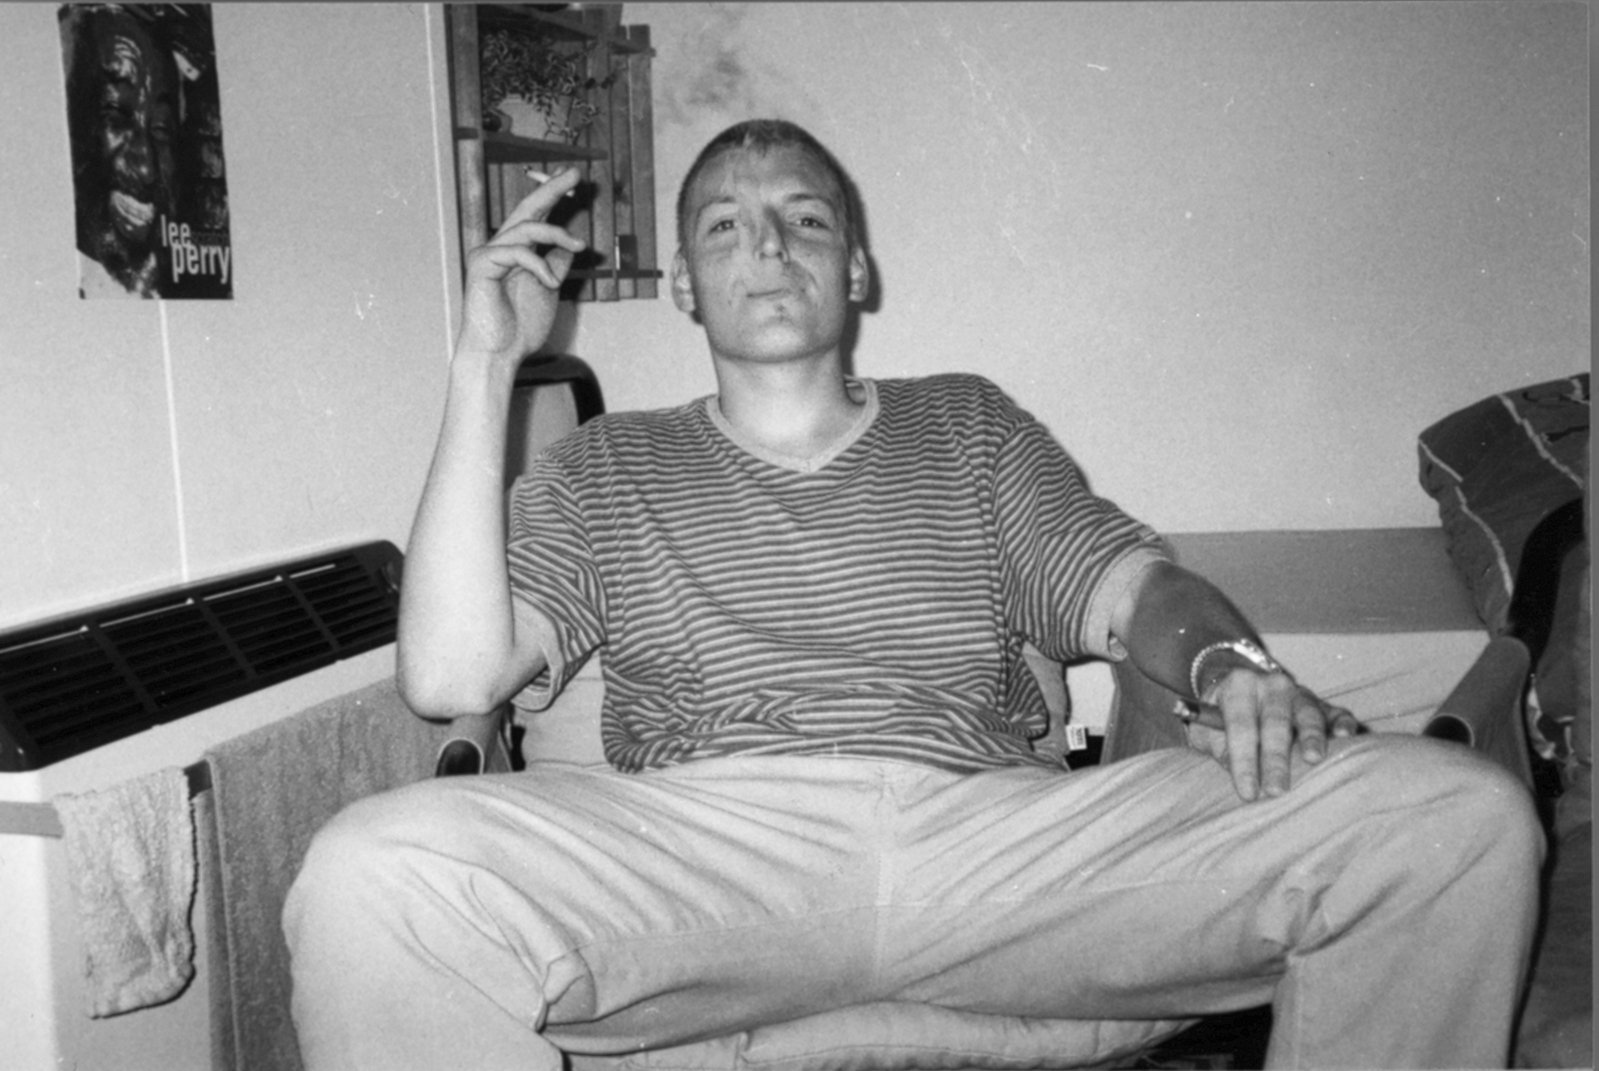 a man smoking a cigarette sitting on a couch in front of a wall